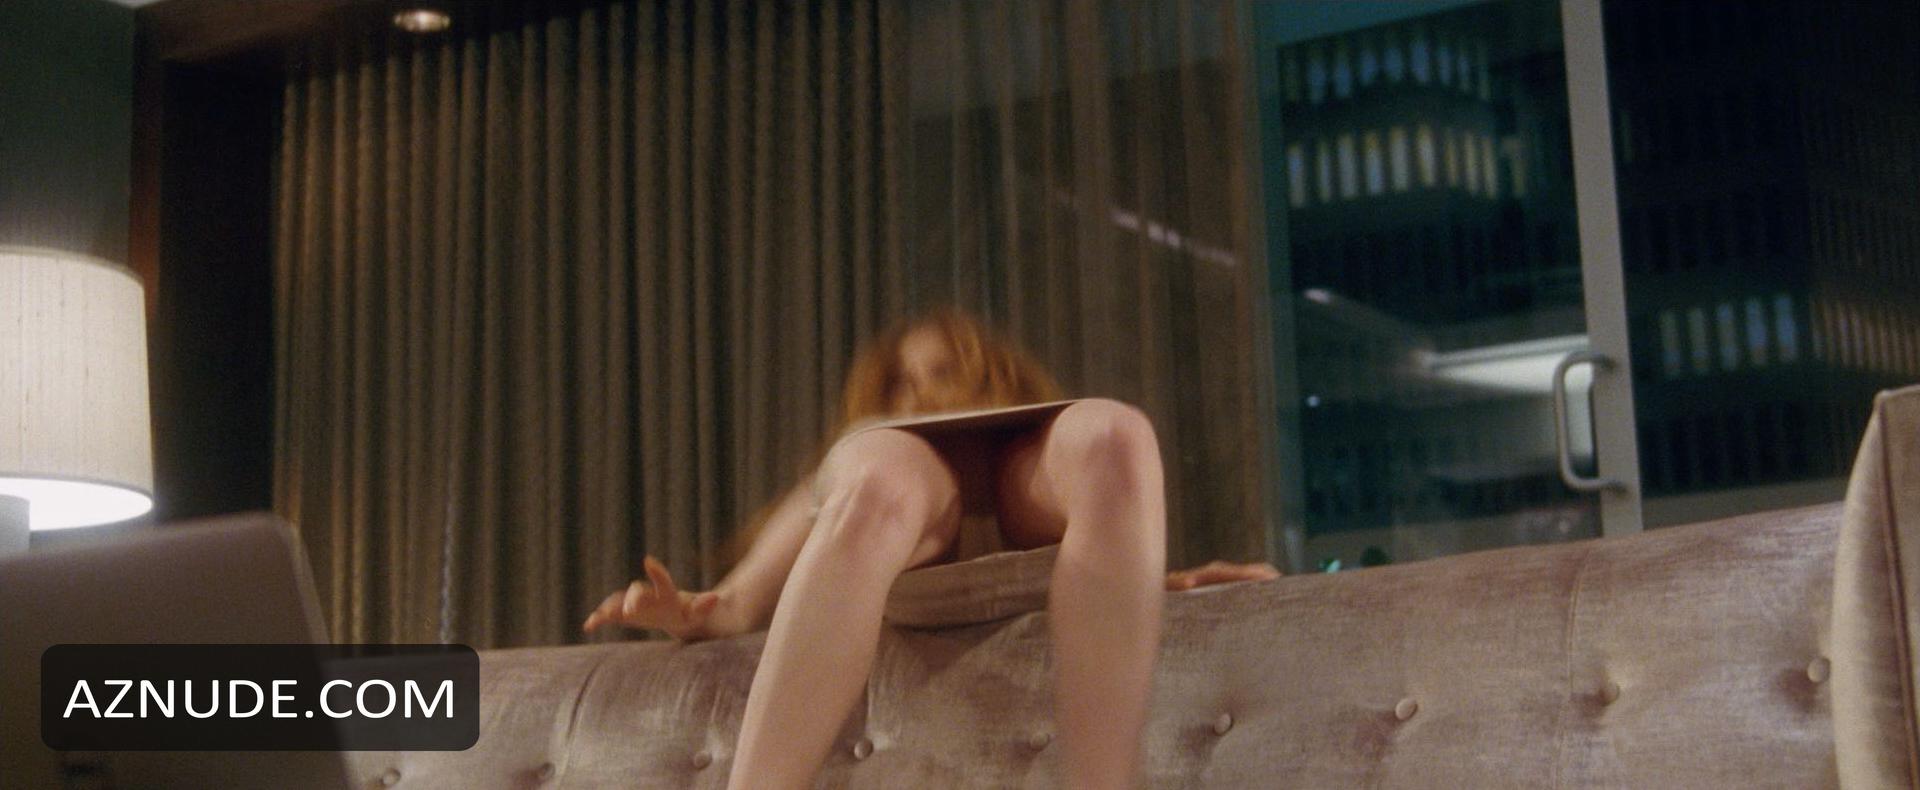 Keeping Up With The Joneses Nude Scenes Aznude